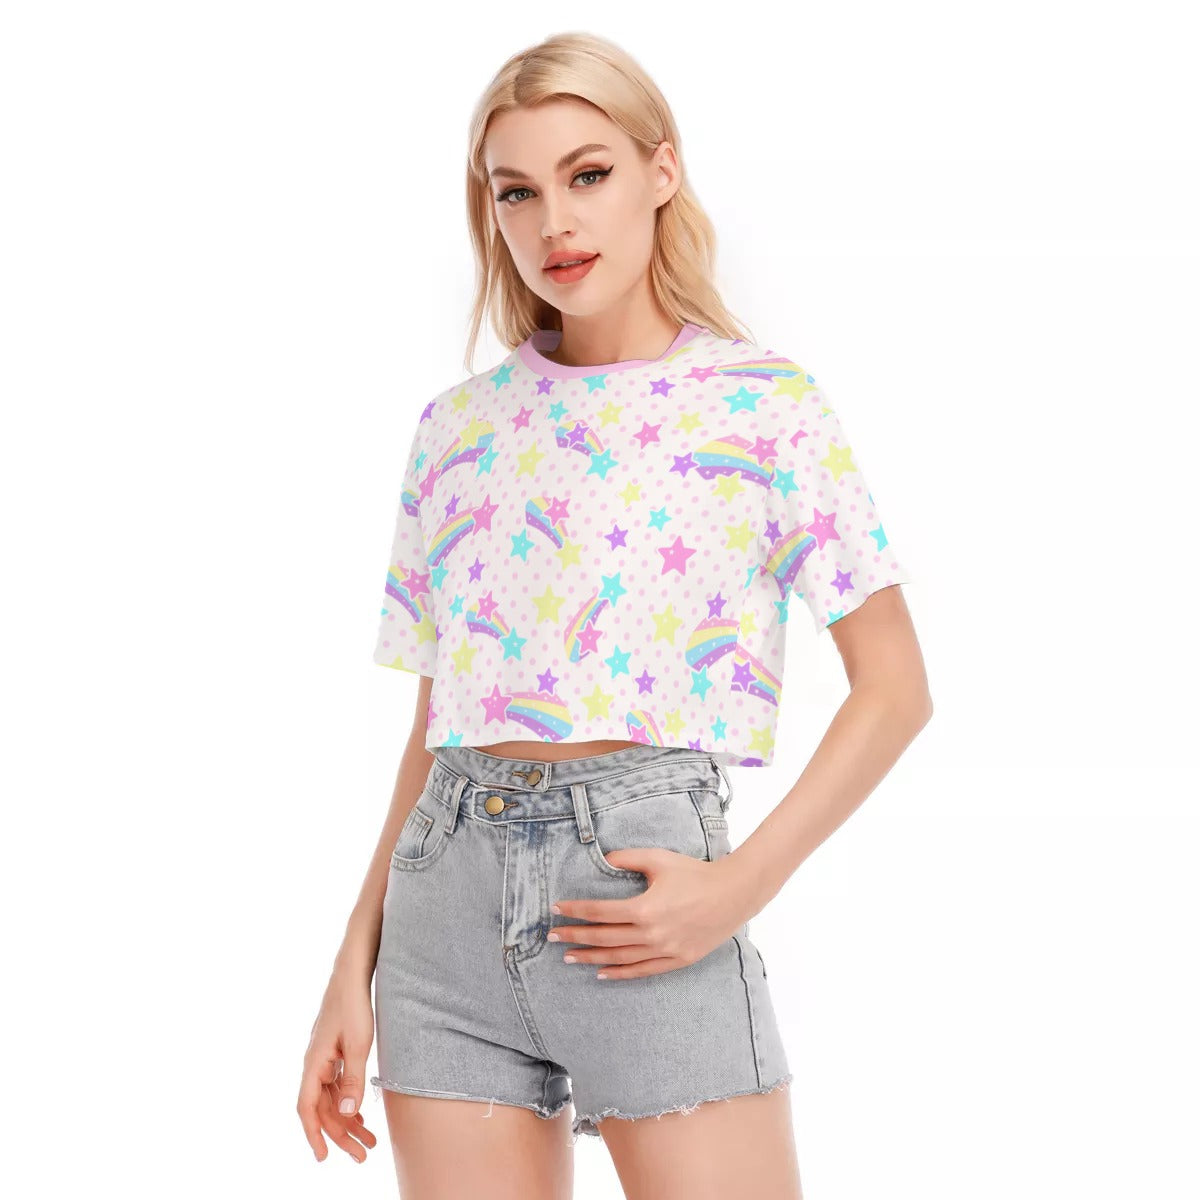 Starry Party White Cotton Crop Top